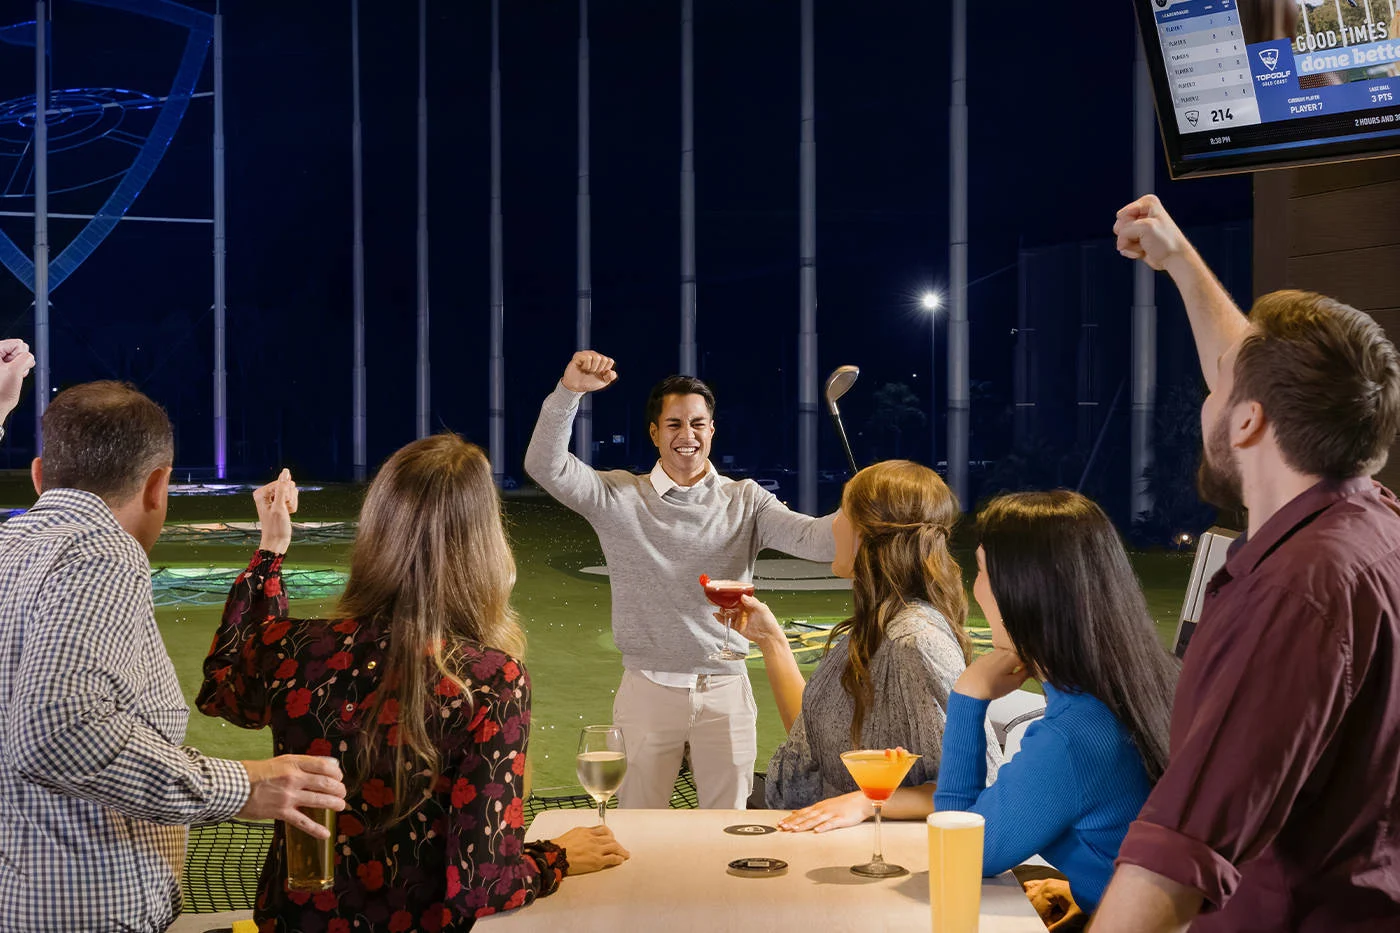 A group of people celebrating at a Topgolf venue, capturing fun moments for memorable photos.